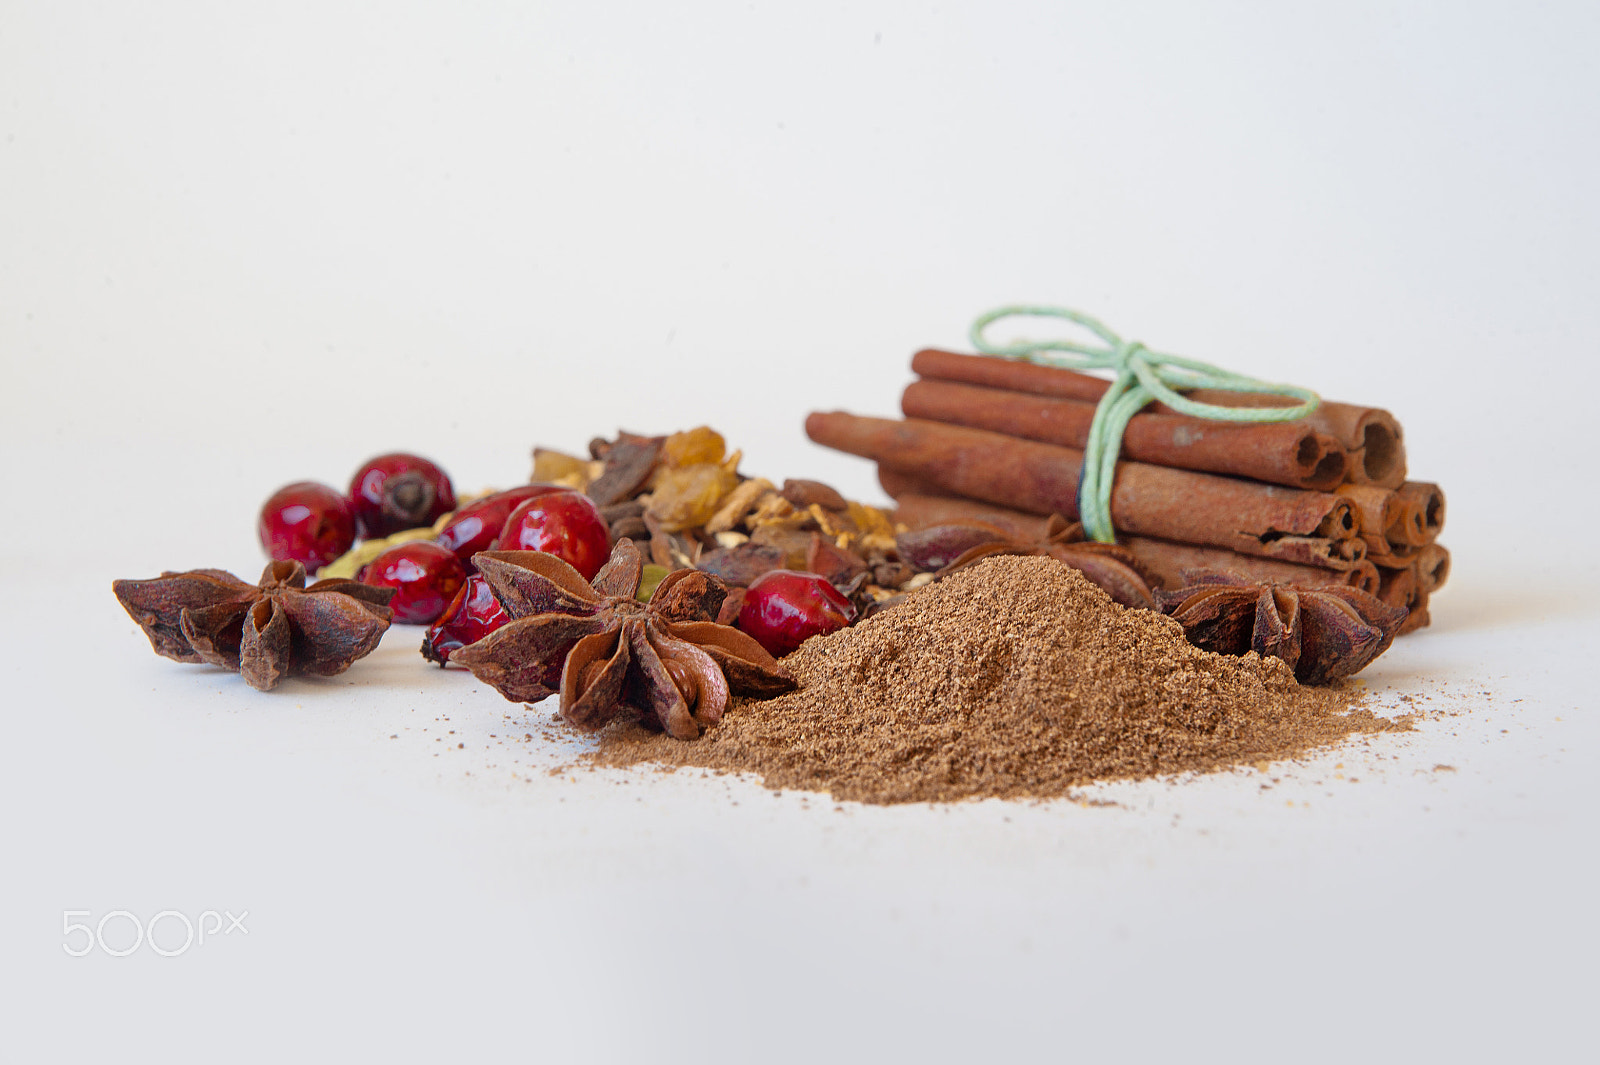 Nikon D700 sample photo. Collection of spices for mulled wine and flavored tea on the white table photography